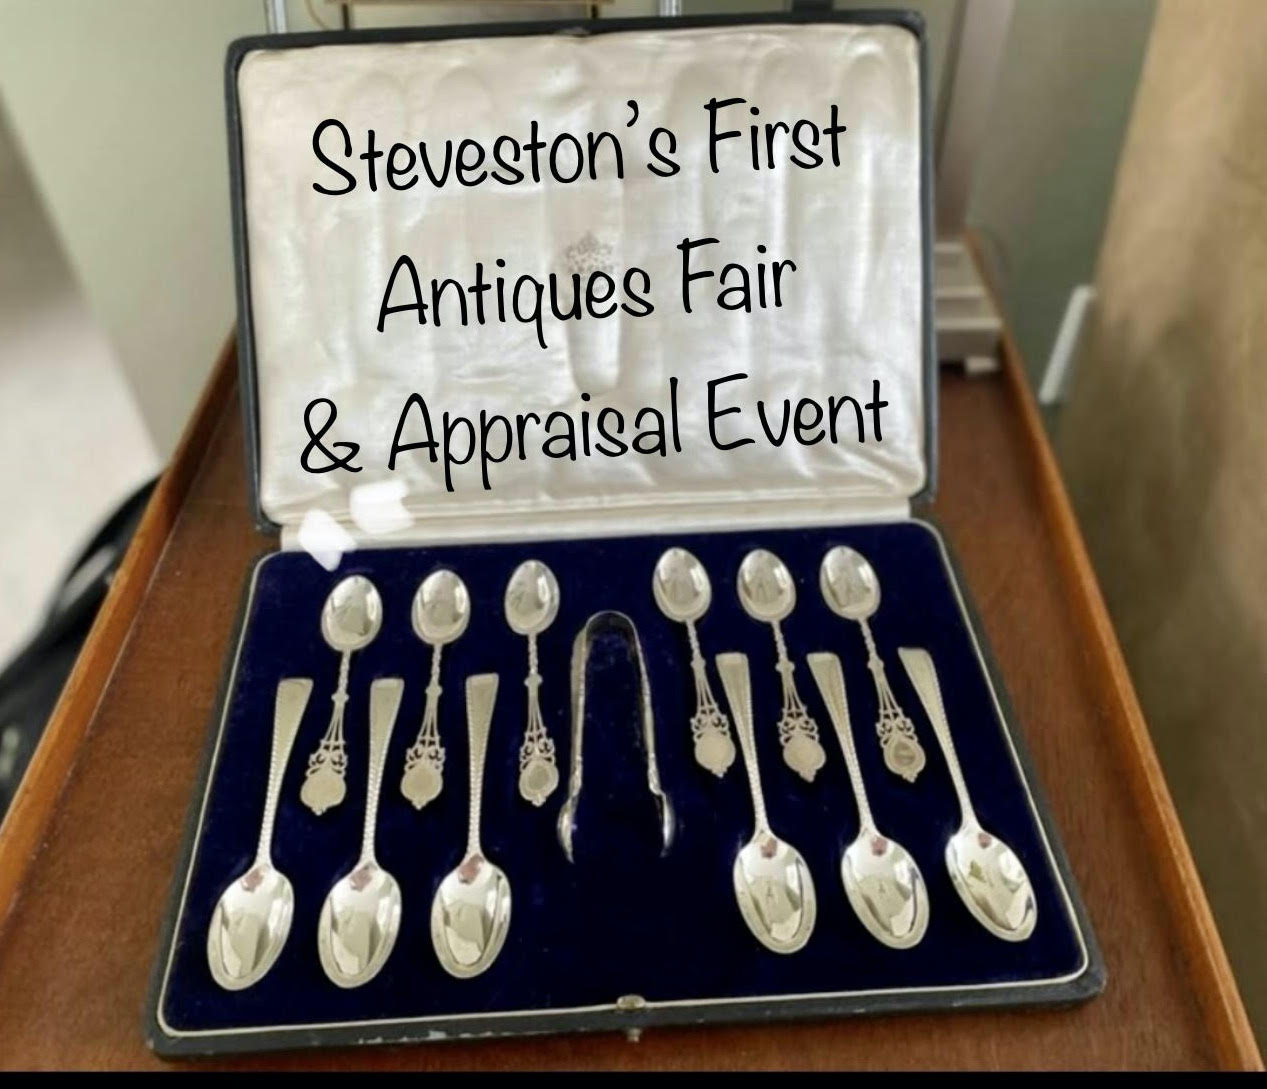 A set of silver spoons in a velvet case is on display with the words "Steveston's First Antique Fair and Appraisal Event"